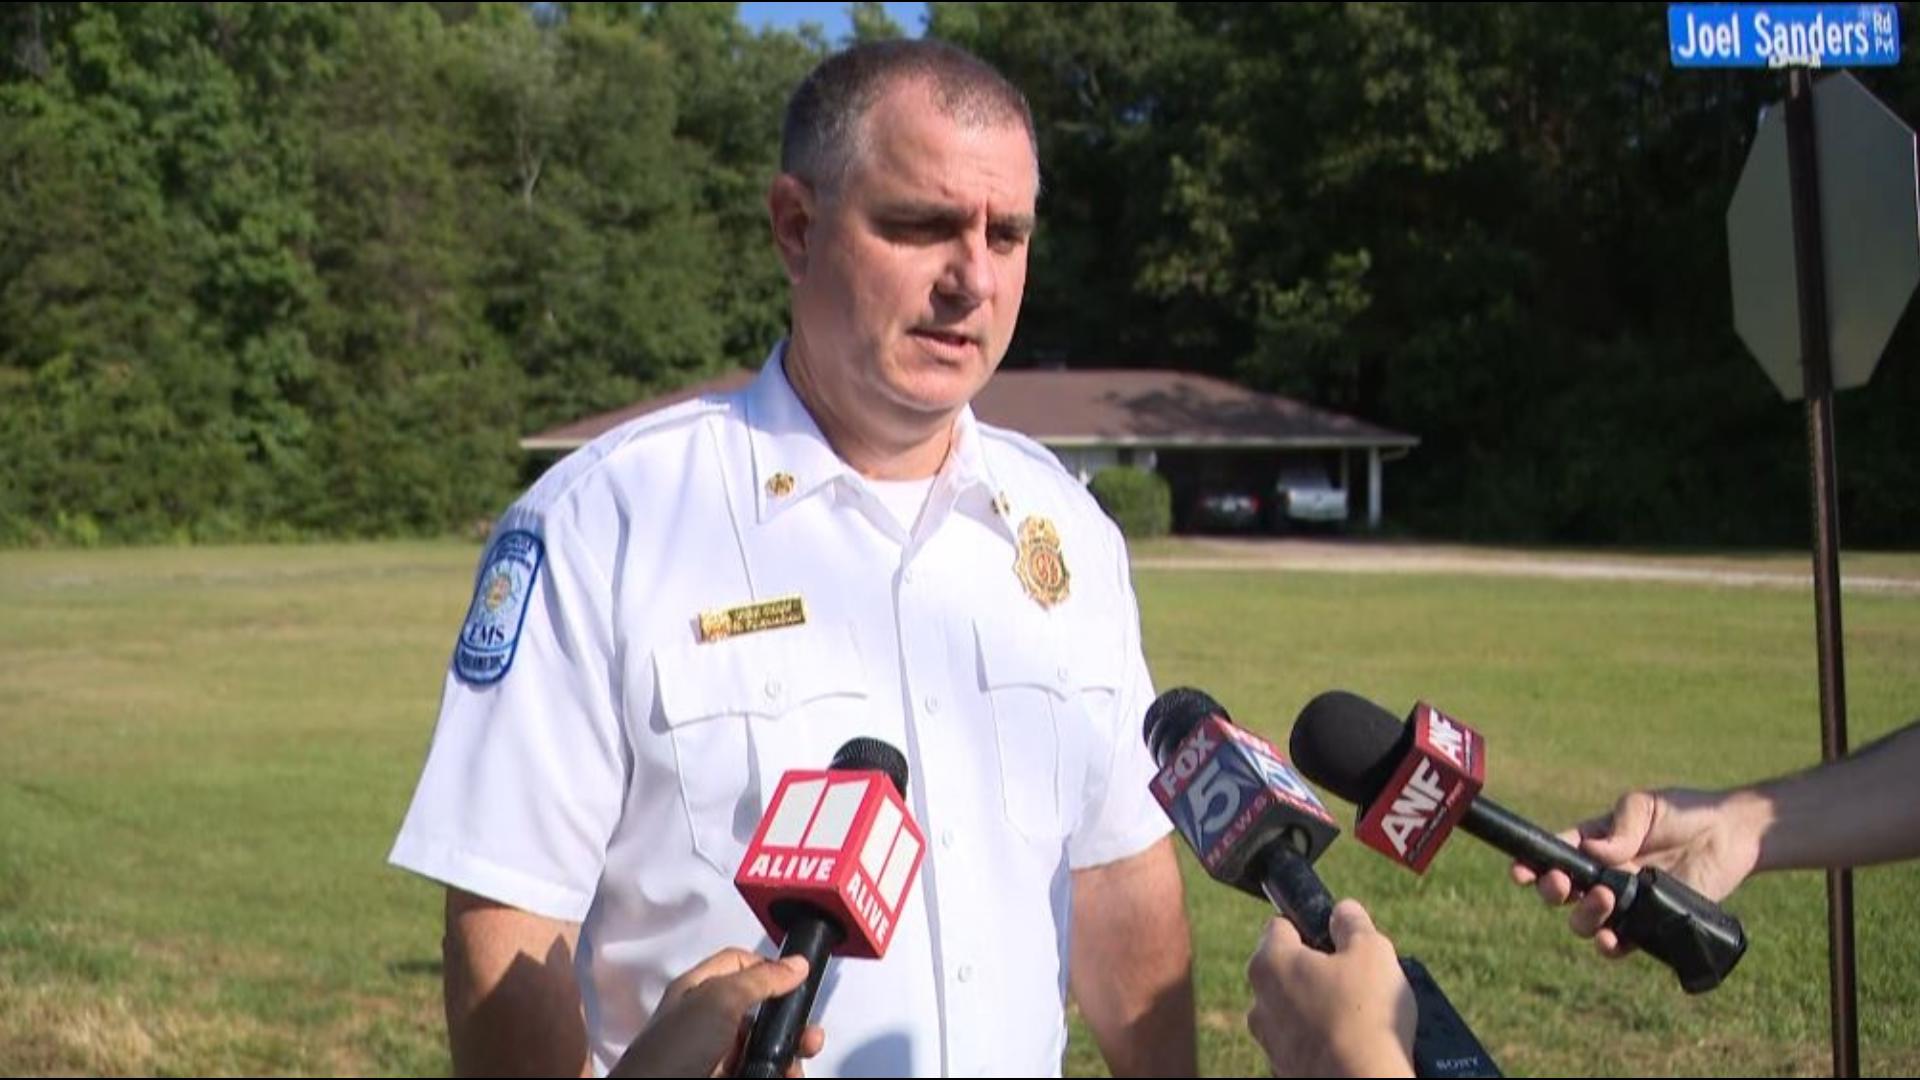 A total of six people are now dead after a house fire in Newnan on Monday morning.